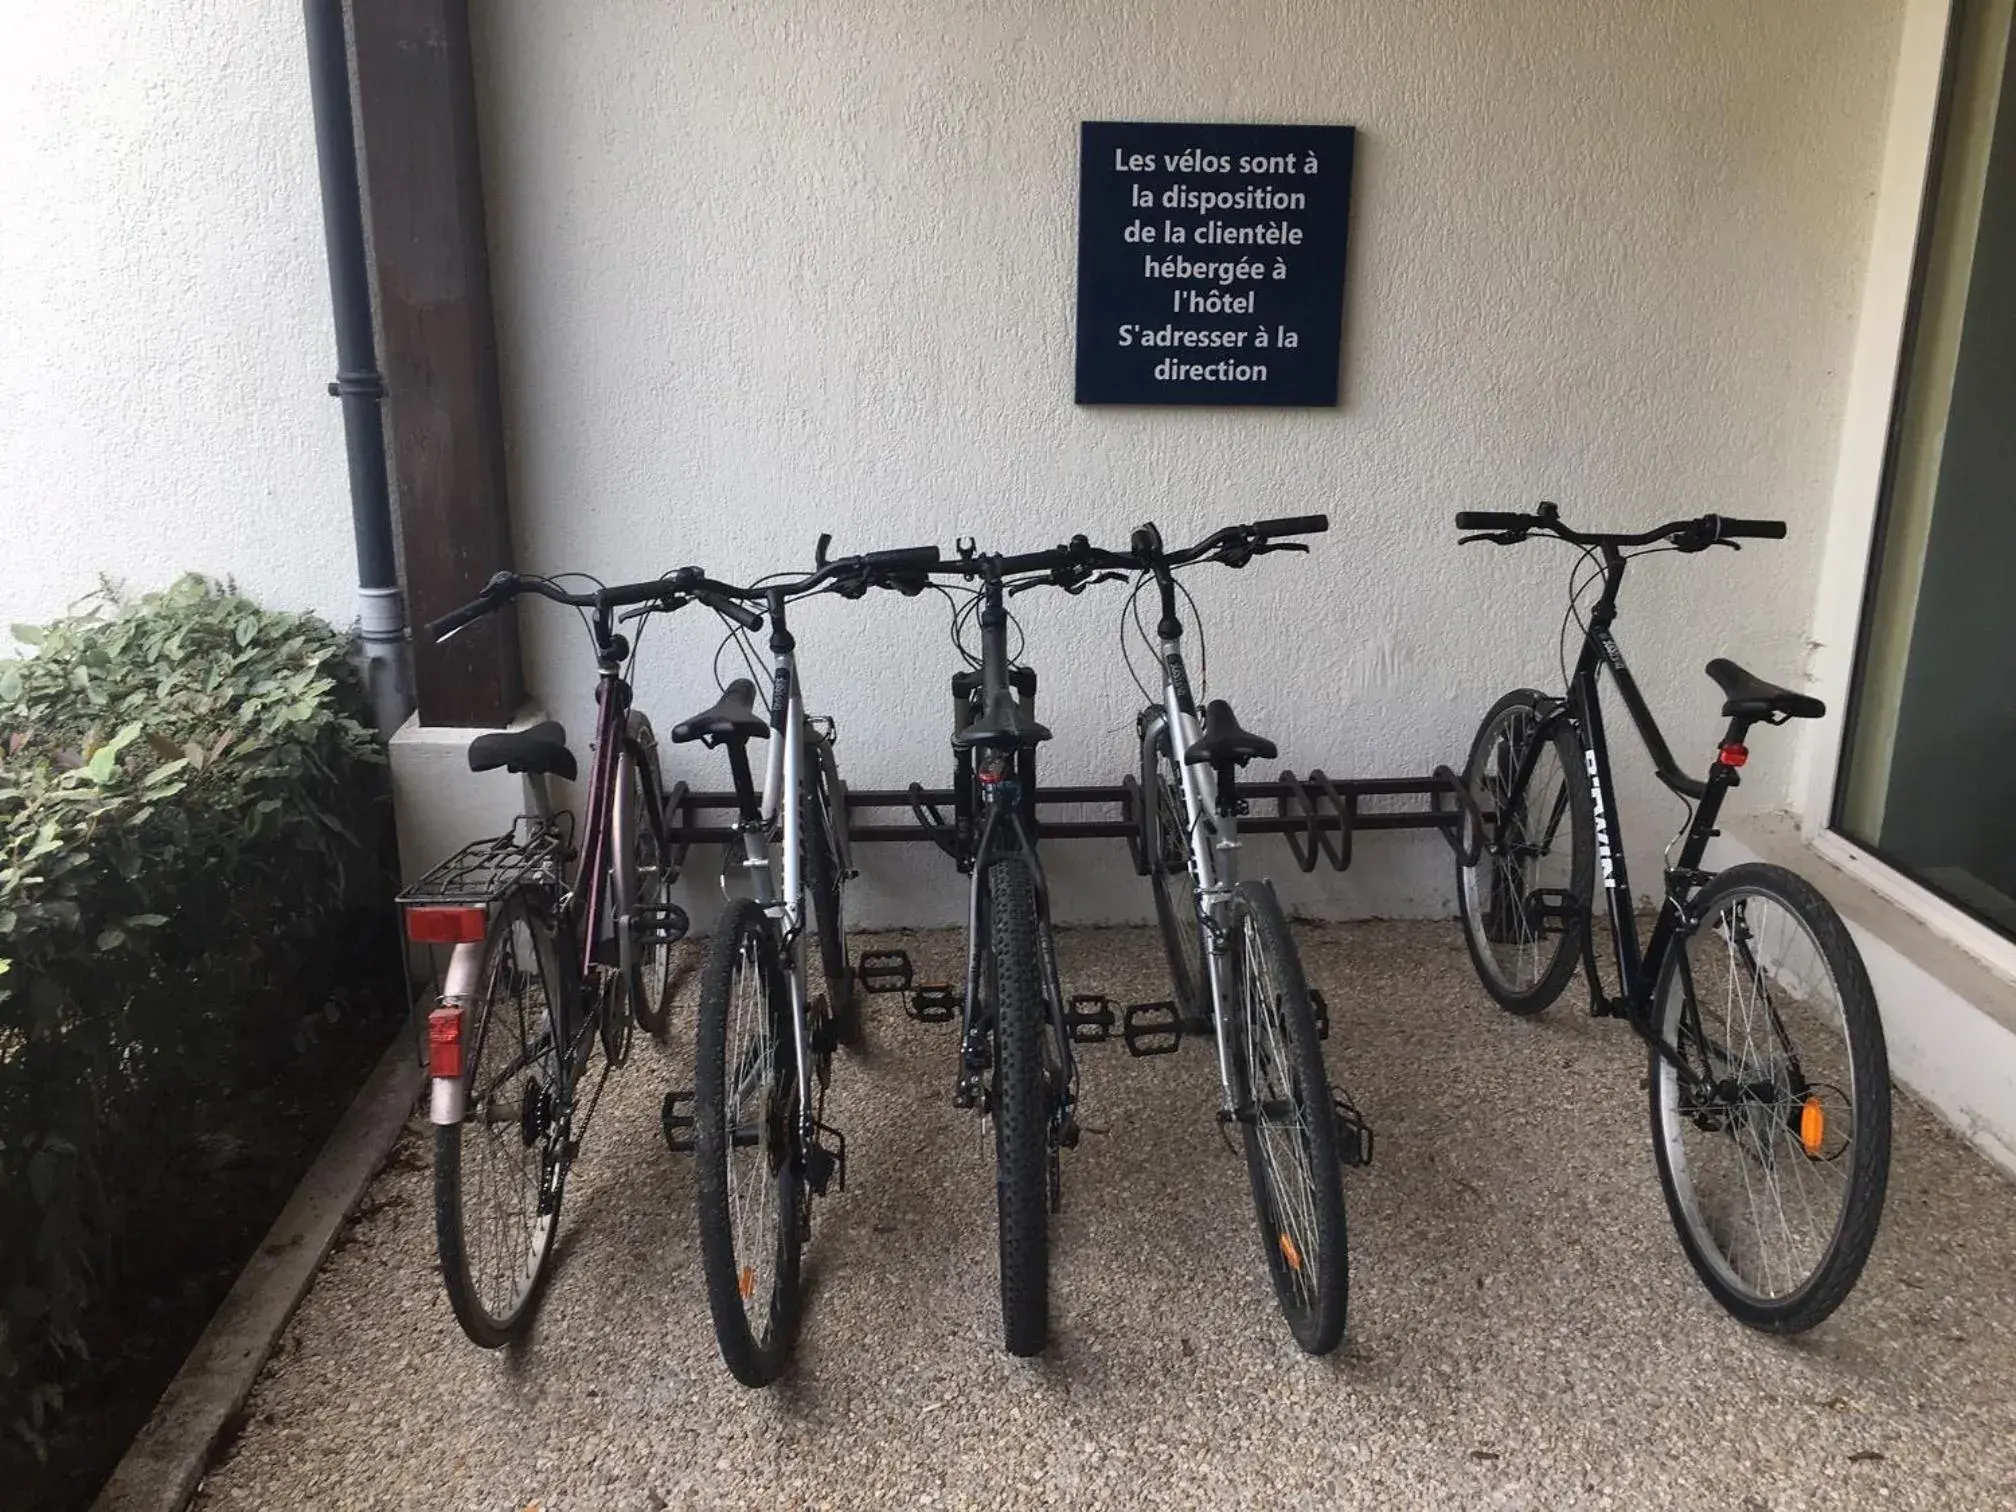 Cycling, Other Activities in Novotel Paris Saclay